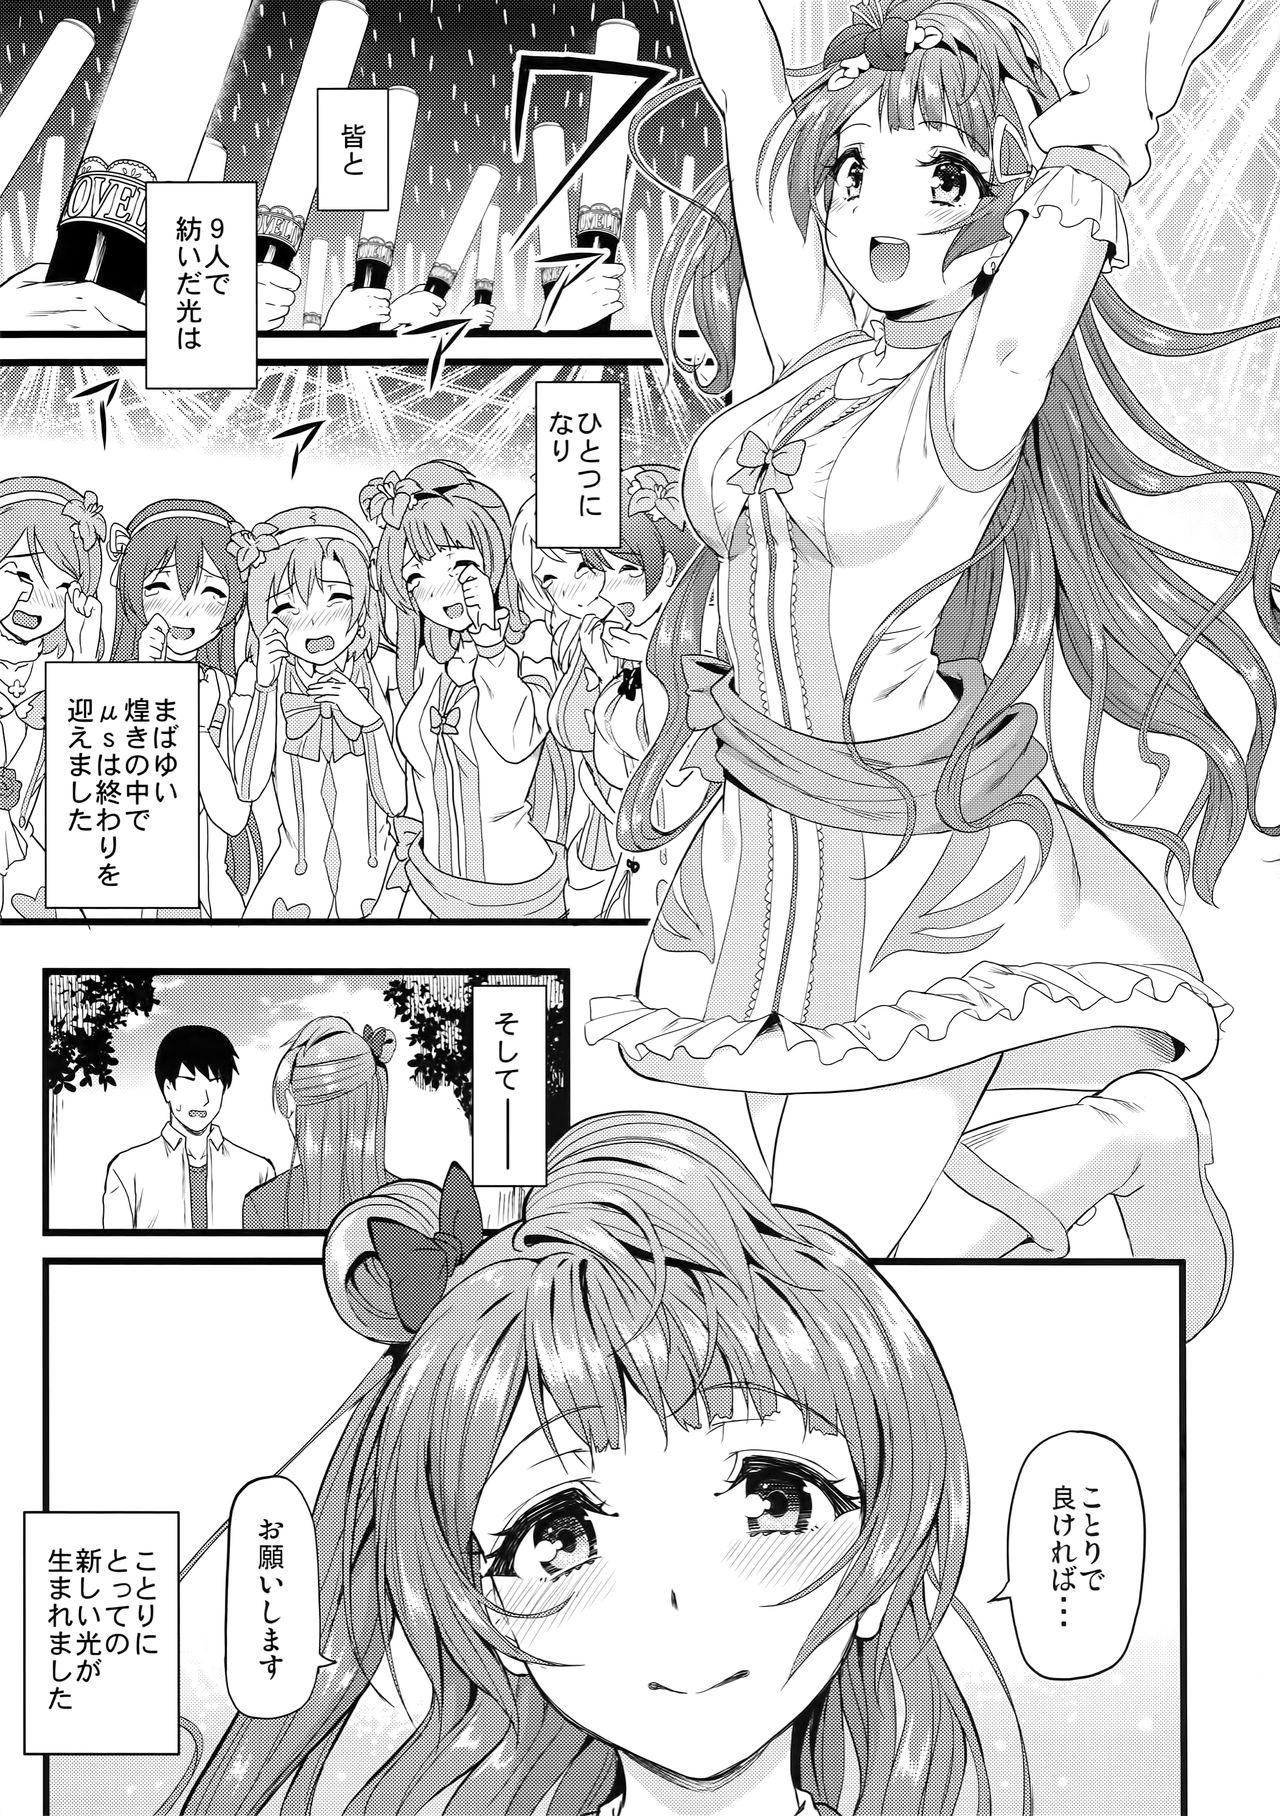 Asshole Kotori to Sweet Time - Love live Camwhore - Page 4